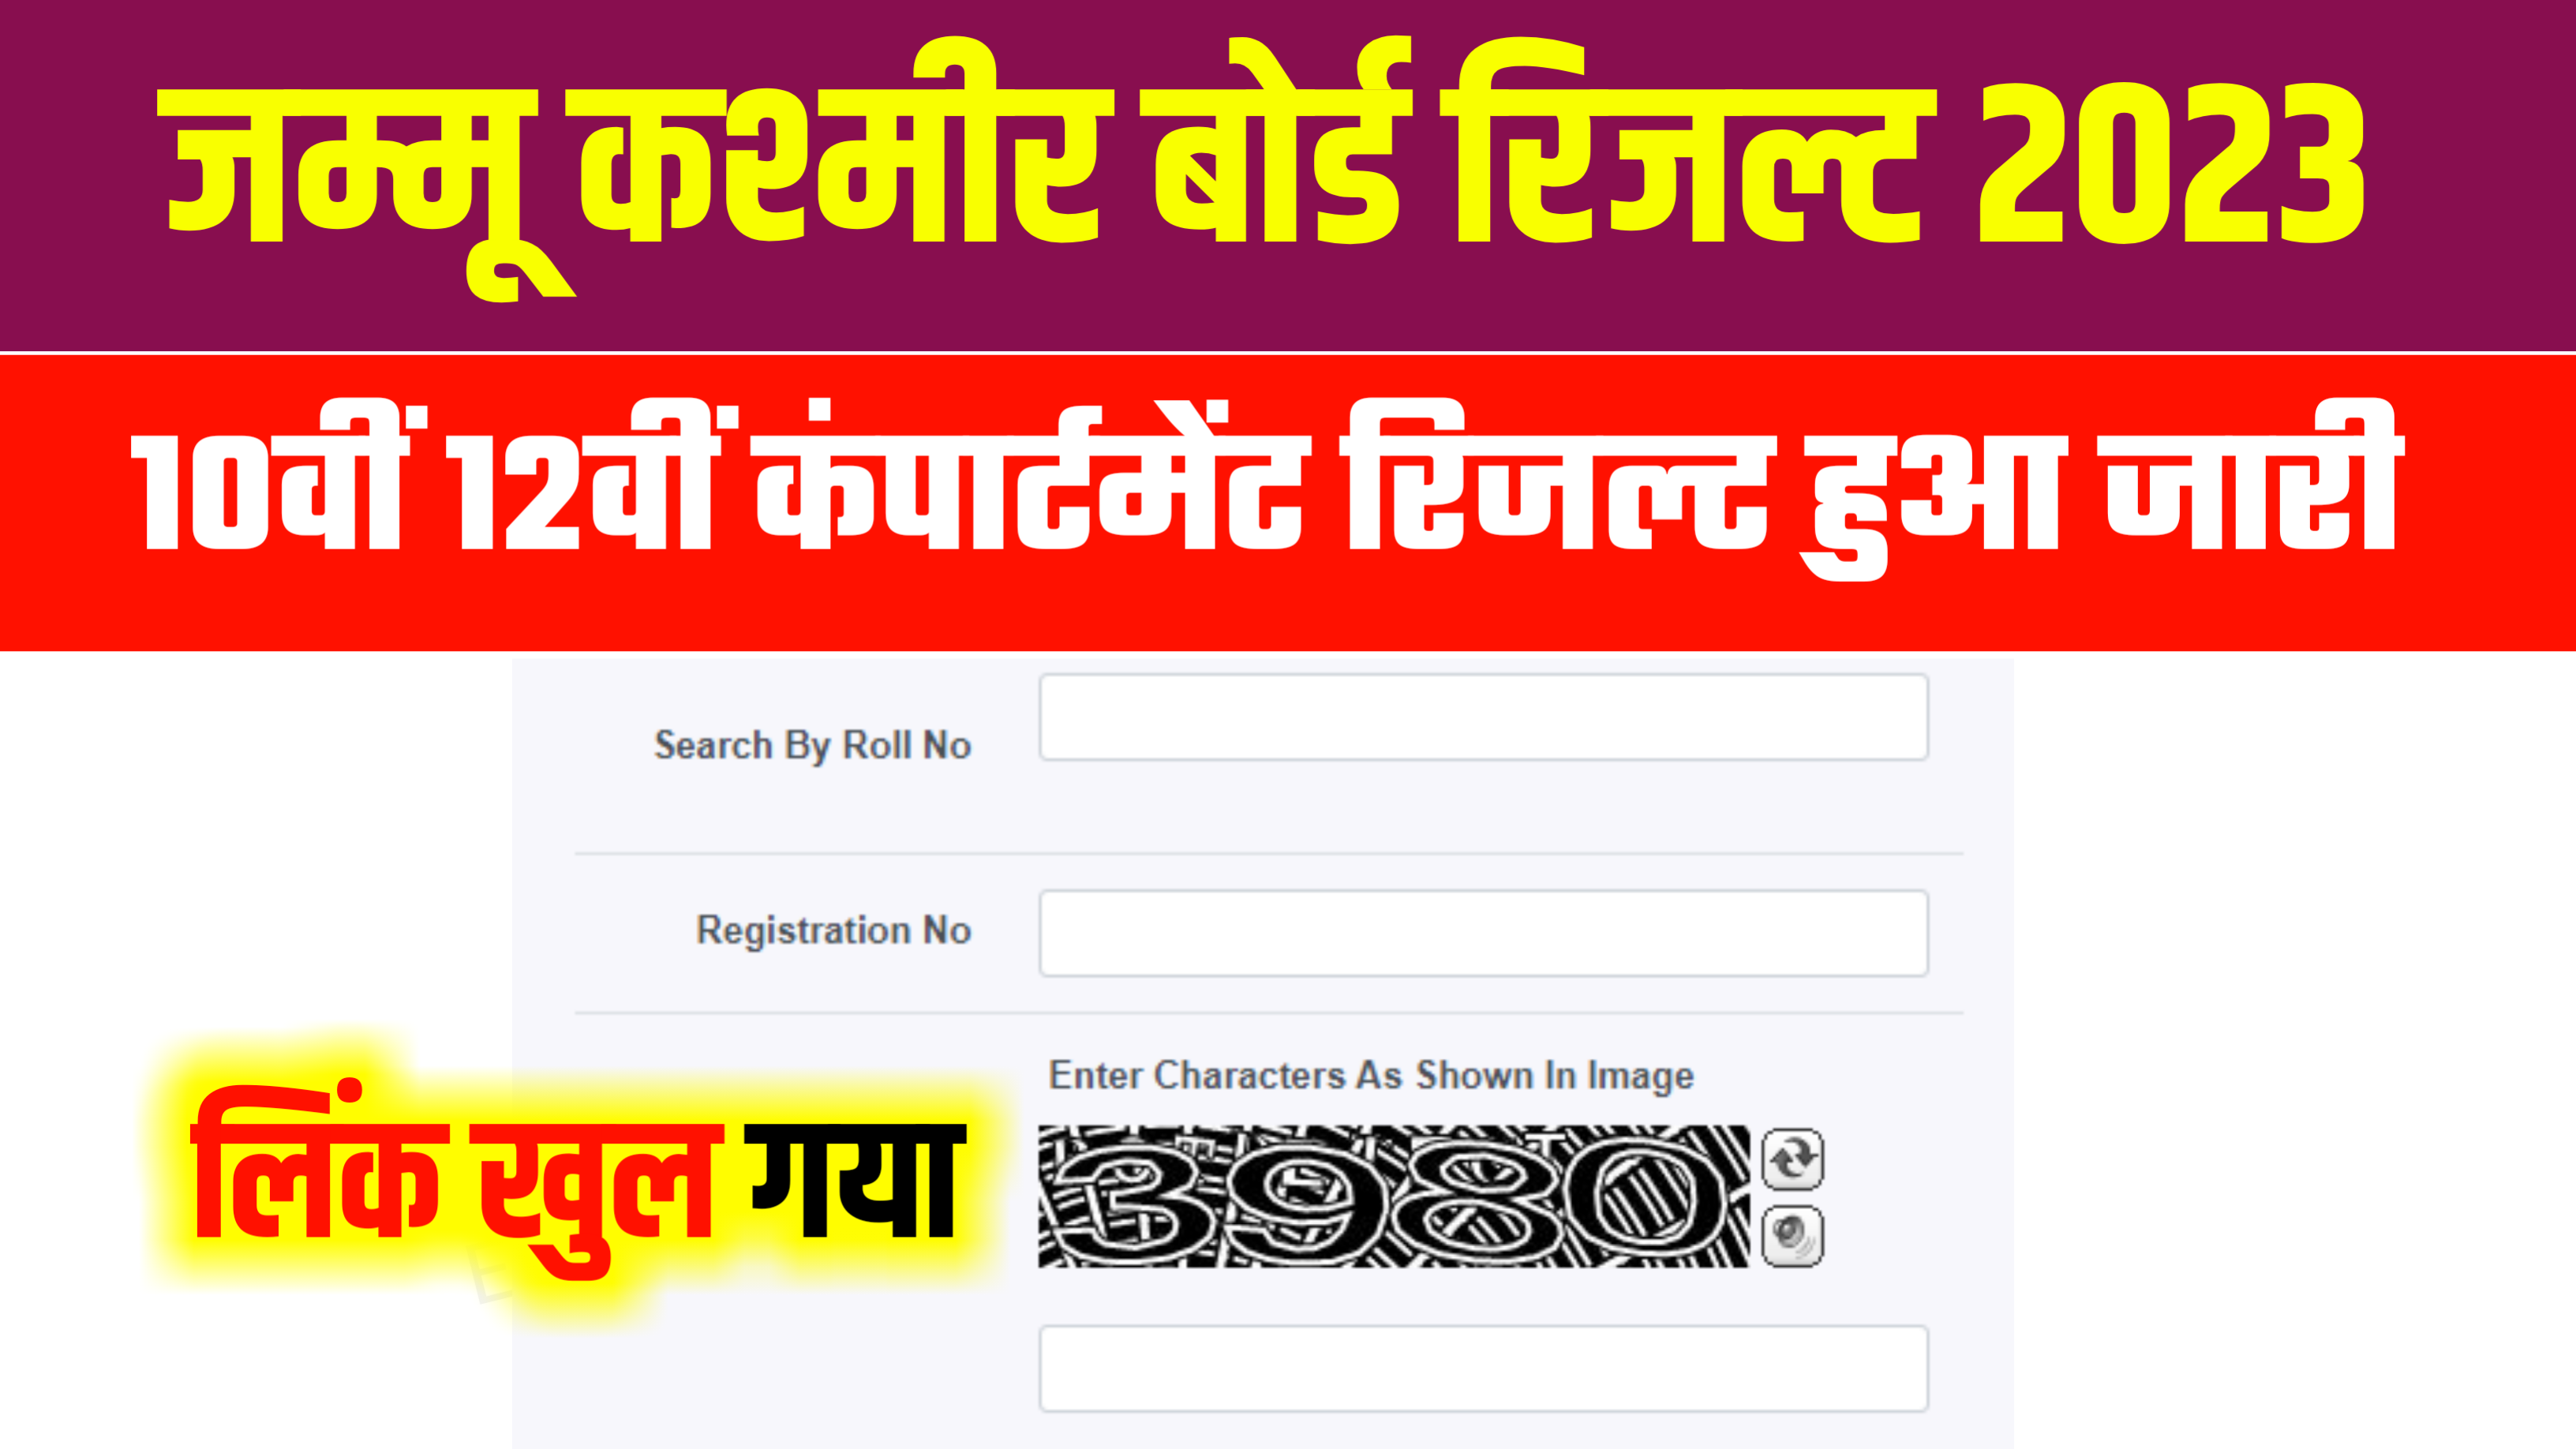 JKBOSE Compartment 10th 12th Result Publish 2024 जम्मू कश्मीर बोर्ड